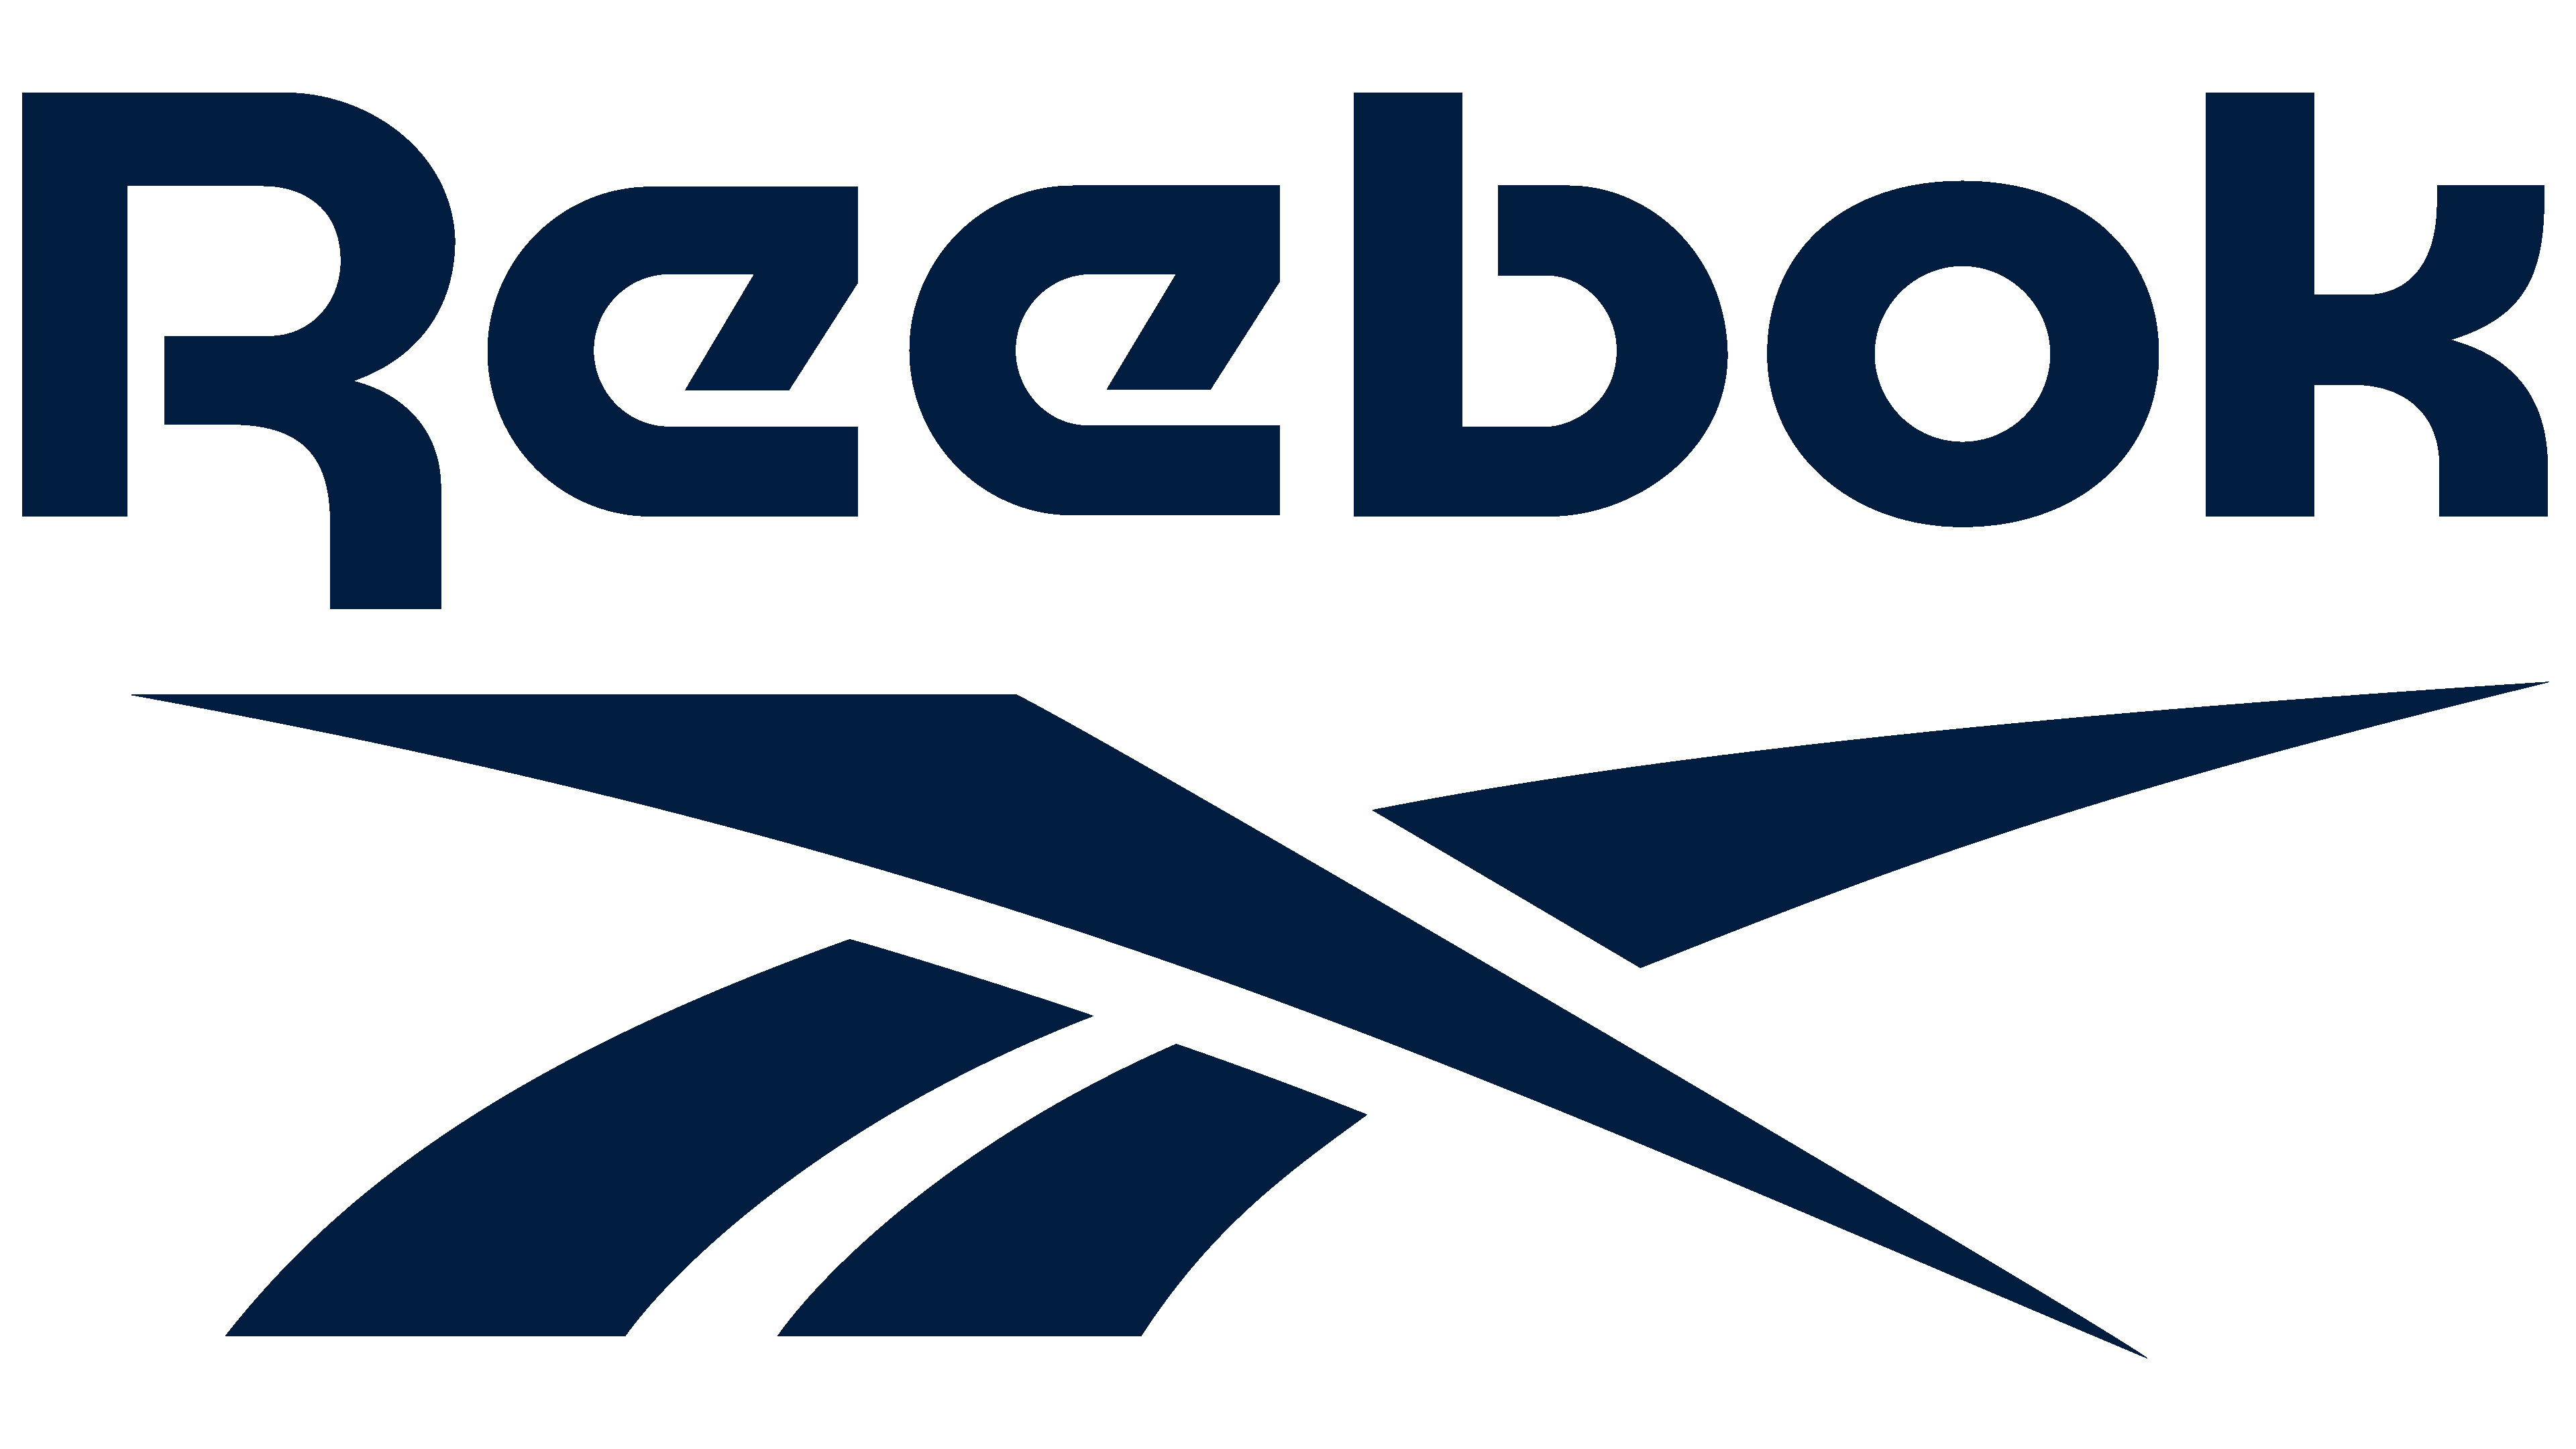 Reebok: An American fitness footwear and clothing manufacturer, Operating as a subsidiary of Adidas, Logo. 3840x2160 4K Wallpaper.